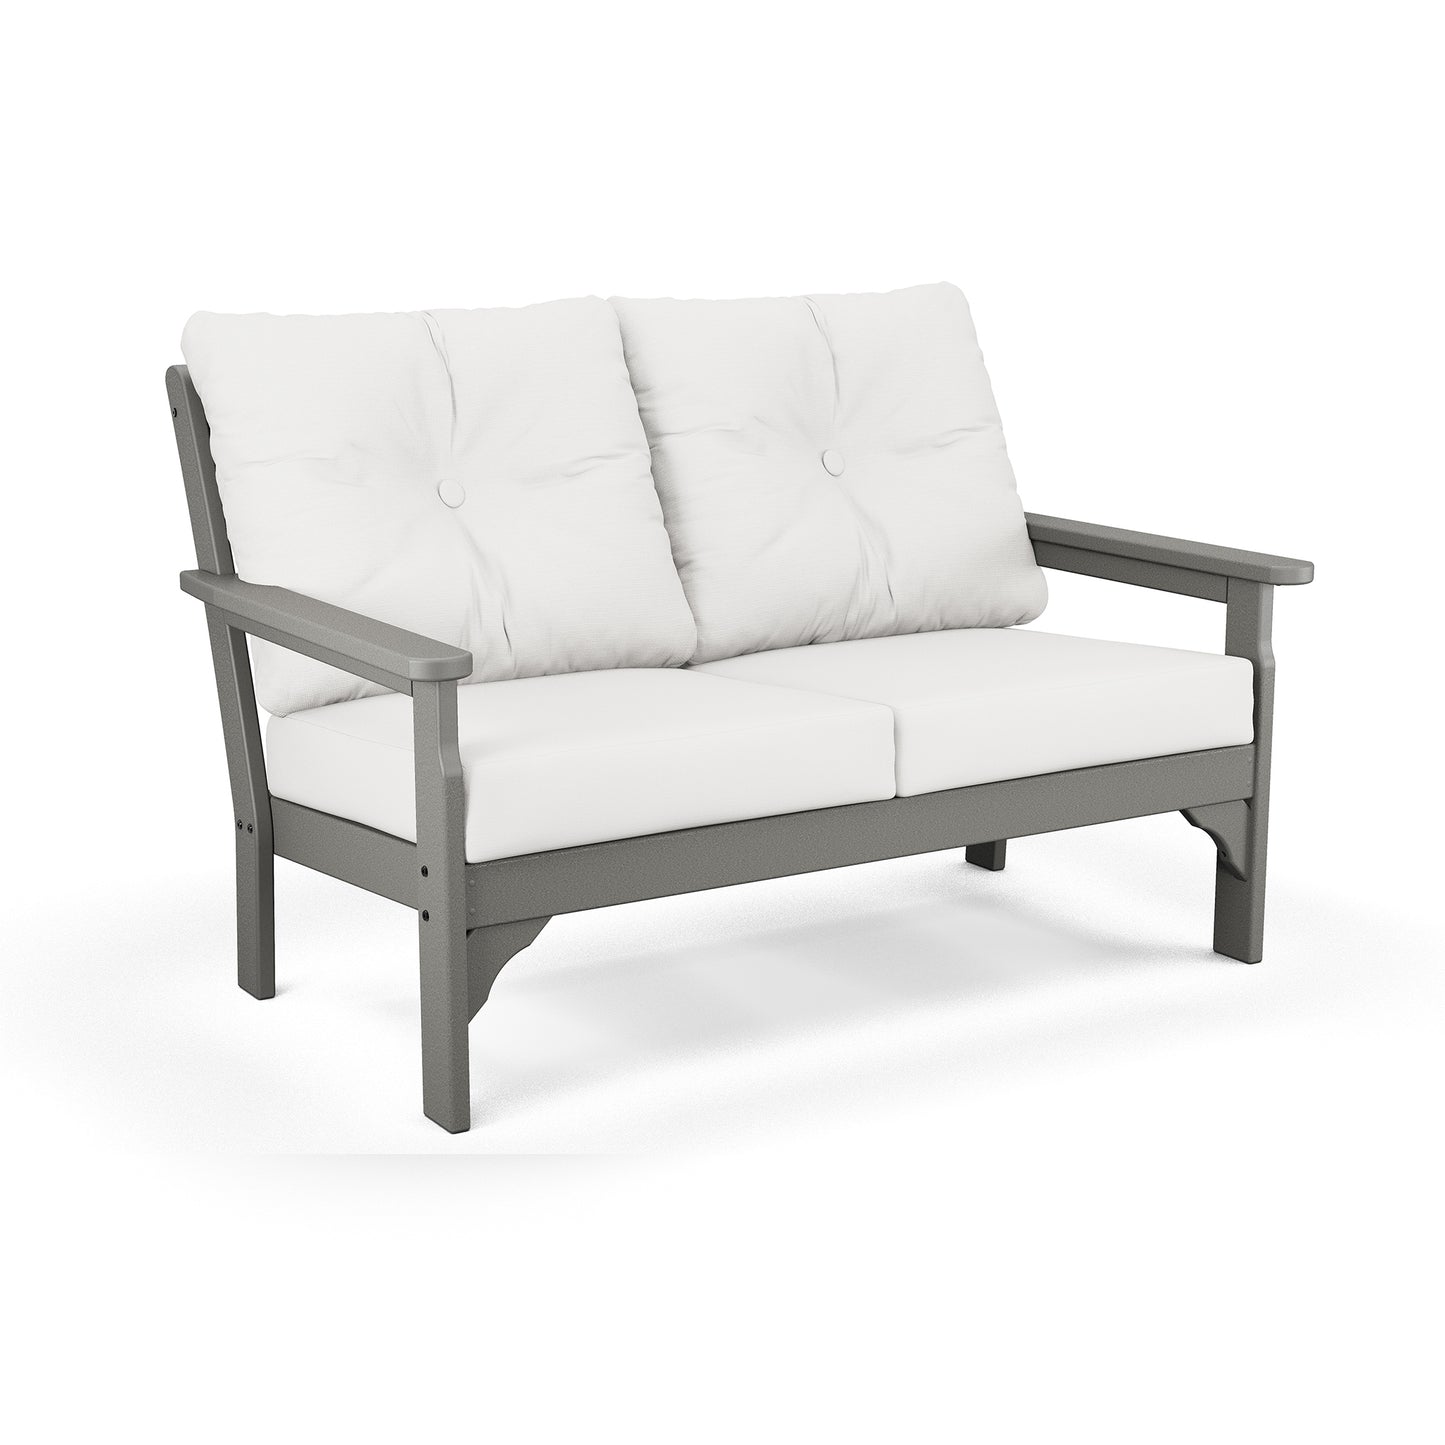 A modern gray POLYWOOD® Vineyard Deep Seating Settee with white cushions on the seat and backrest, designed with a simple, clean frame and rectangular structure.